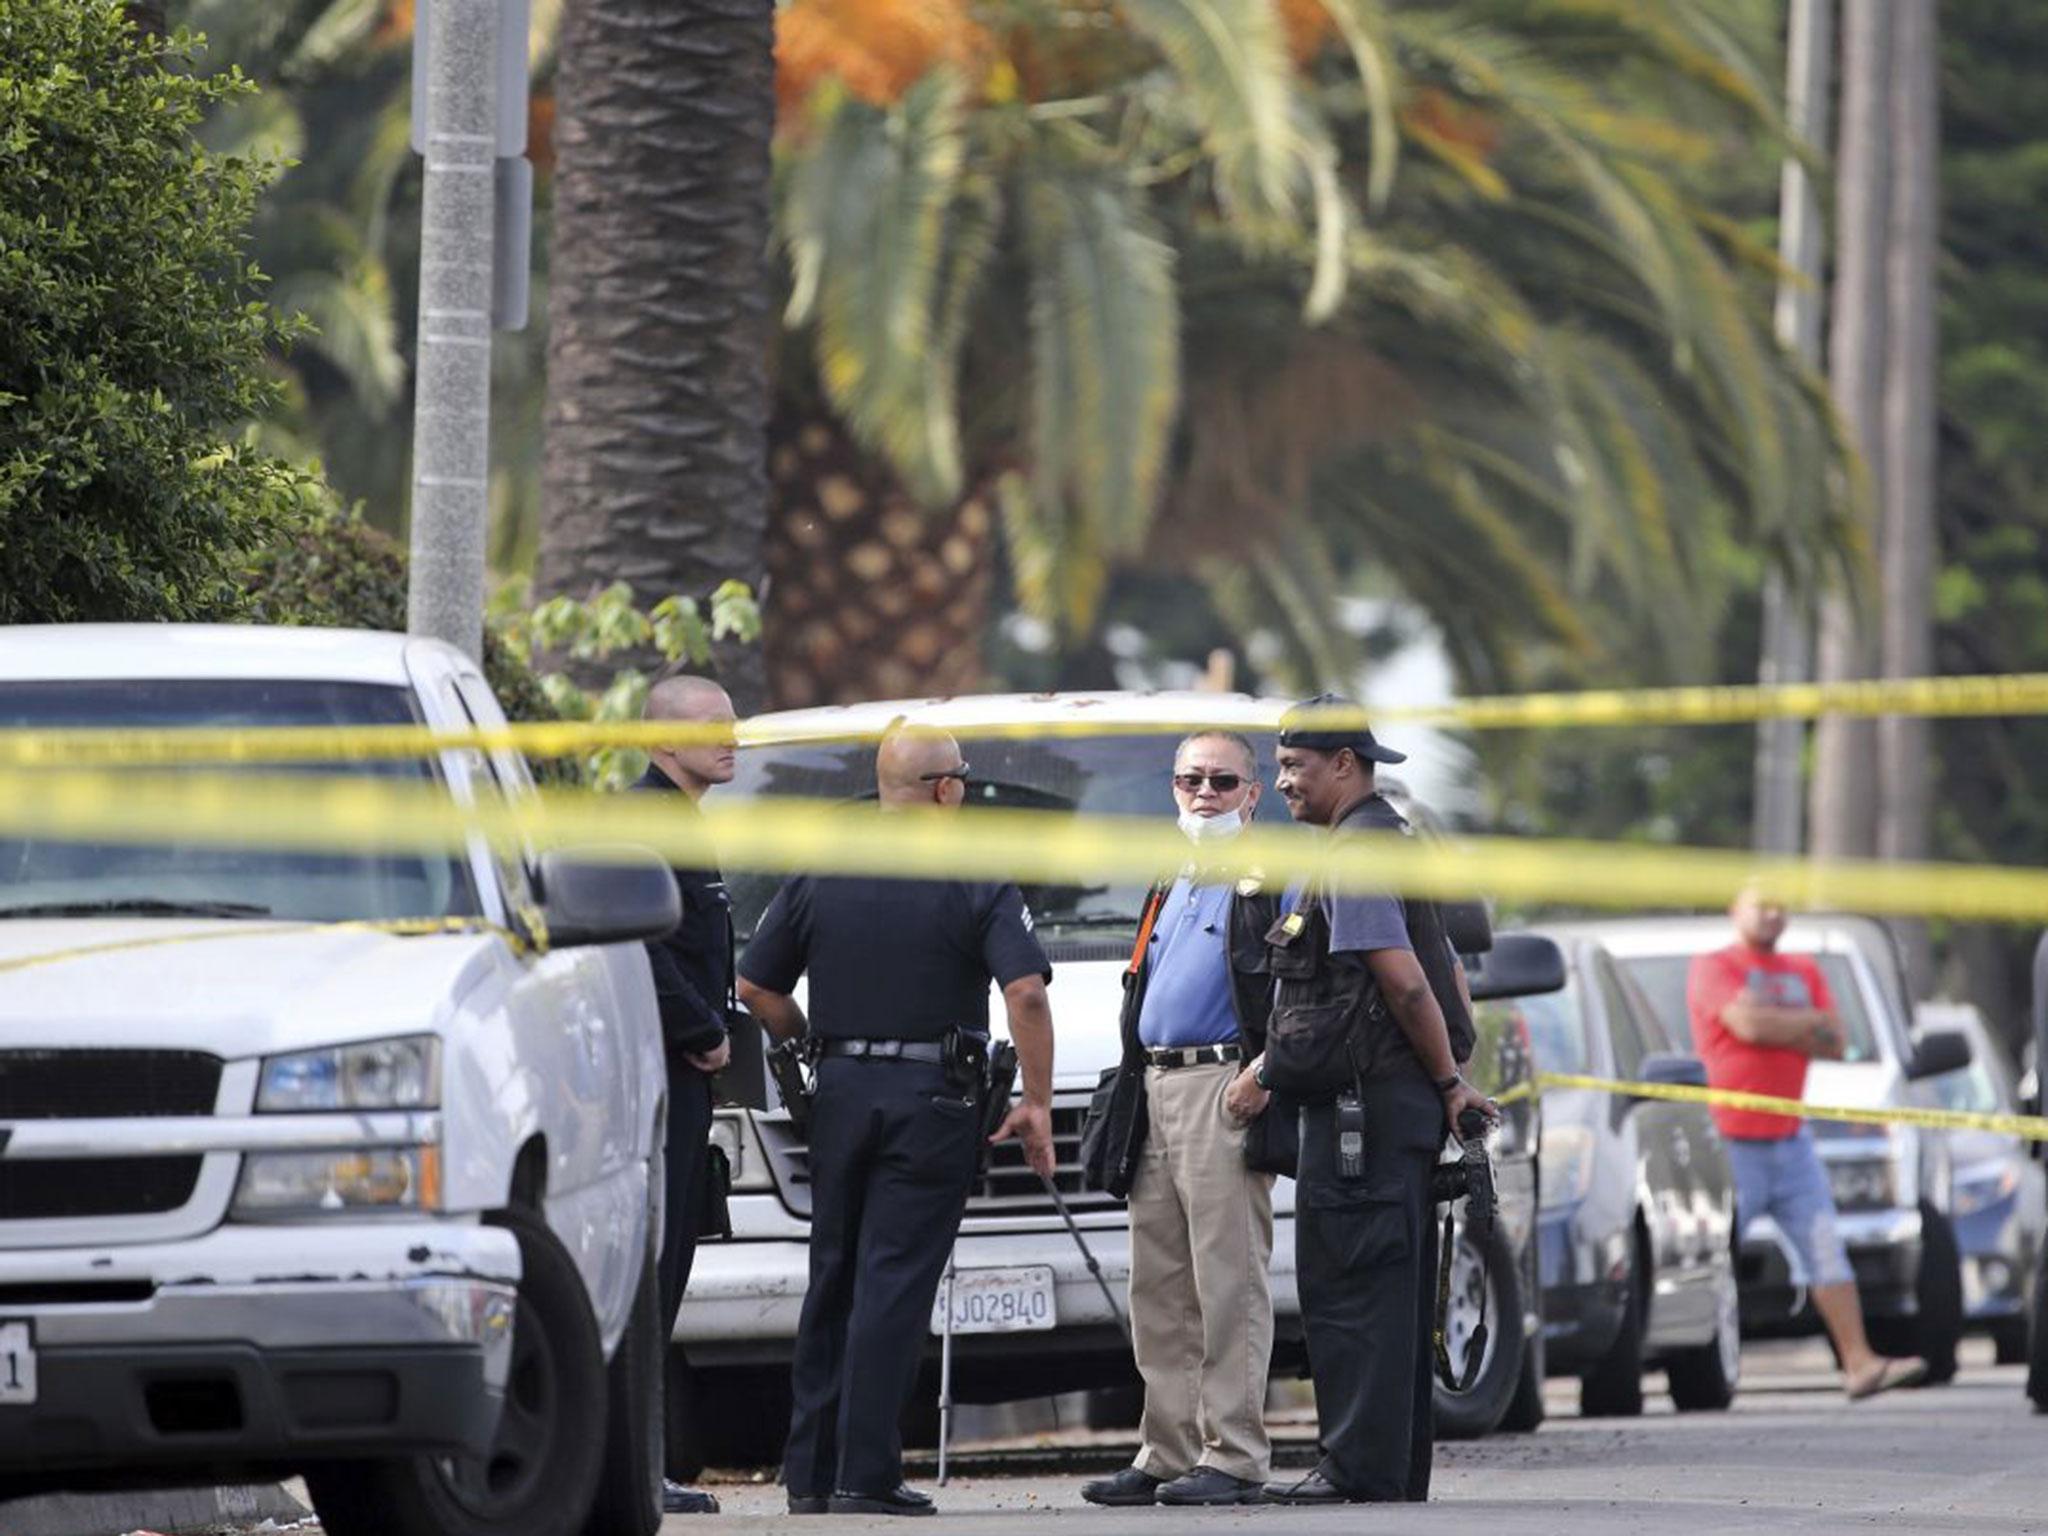 Los Angeles police investigators work the scene of a fatal shooting in the West Adam district